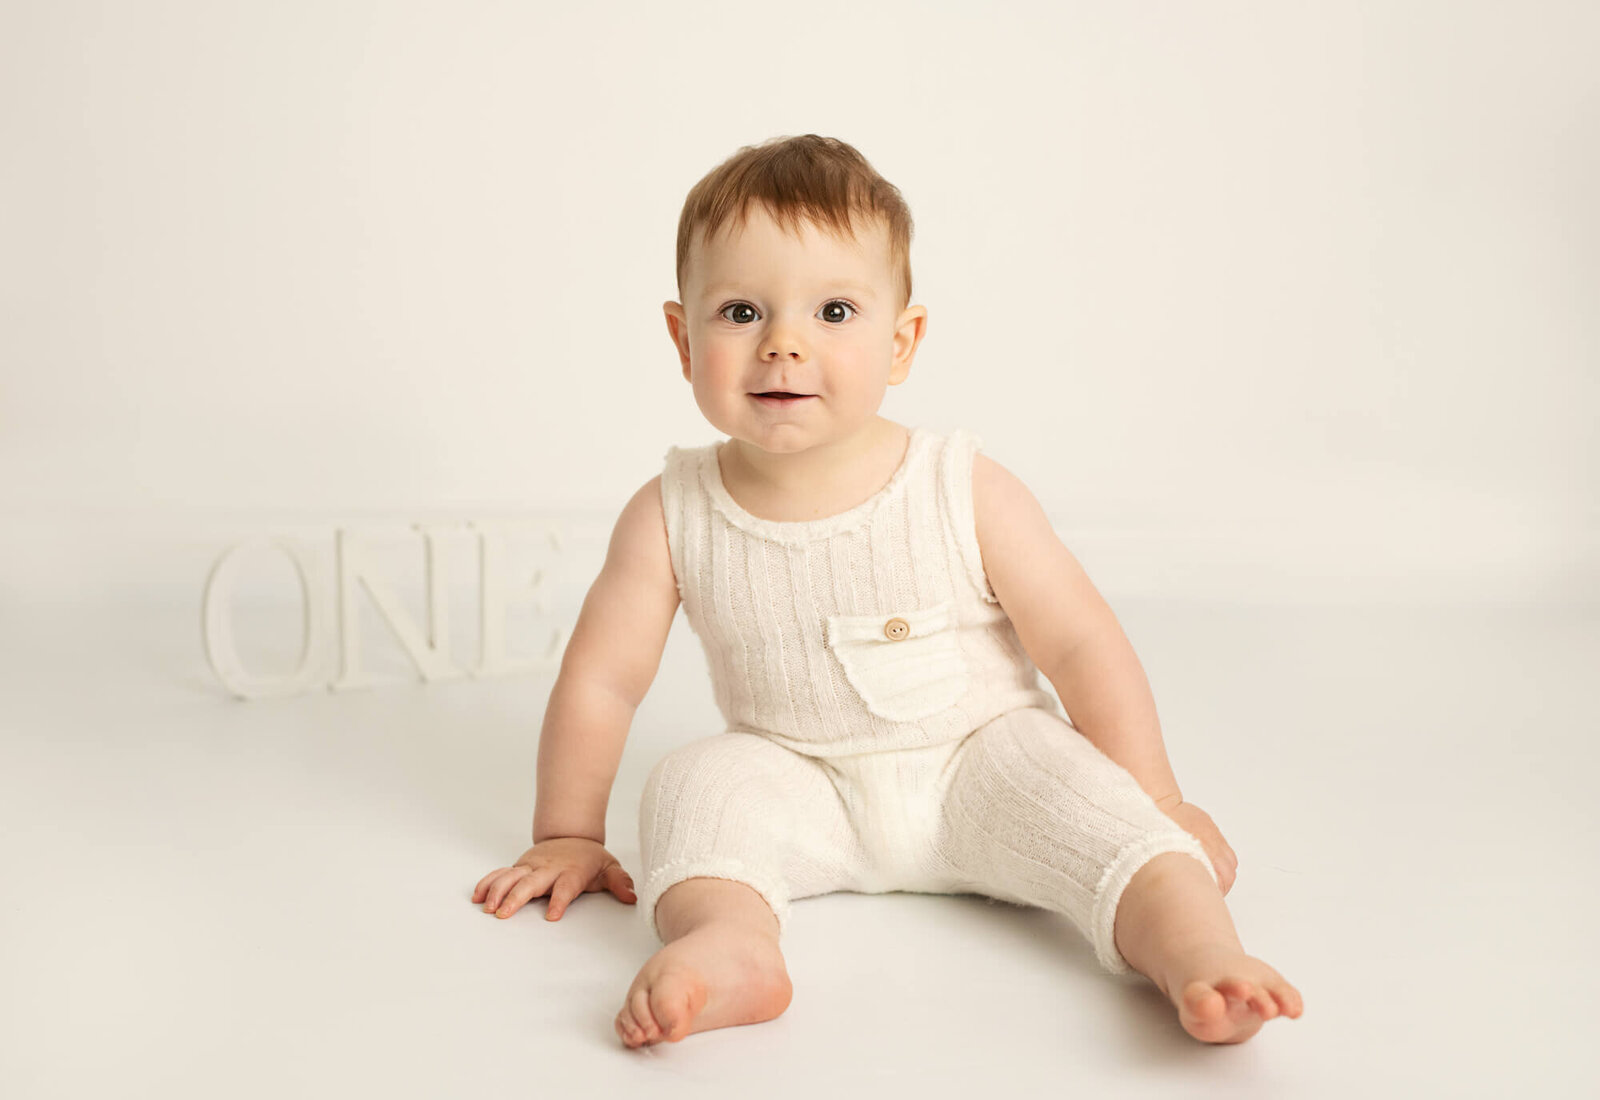 One year old baby with white romper and white background